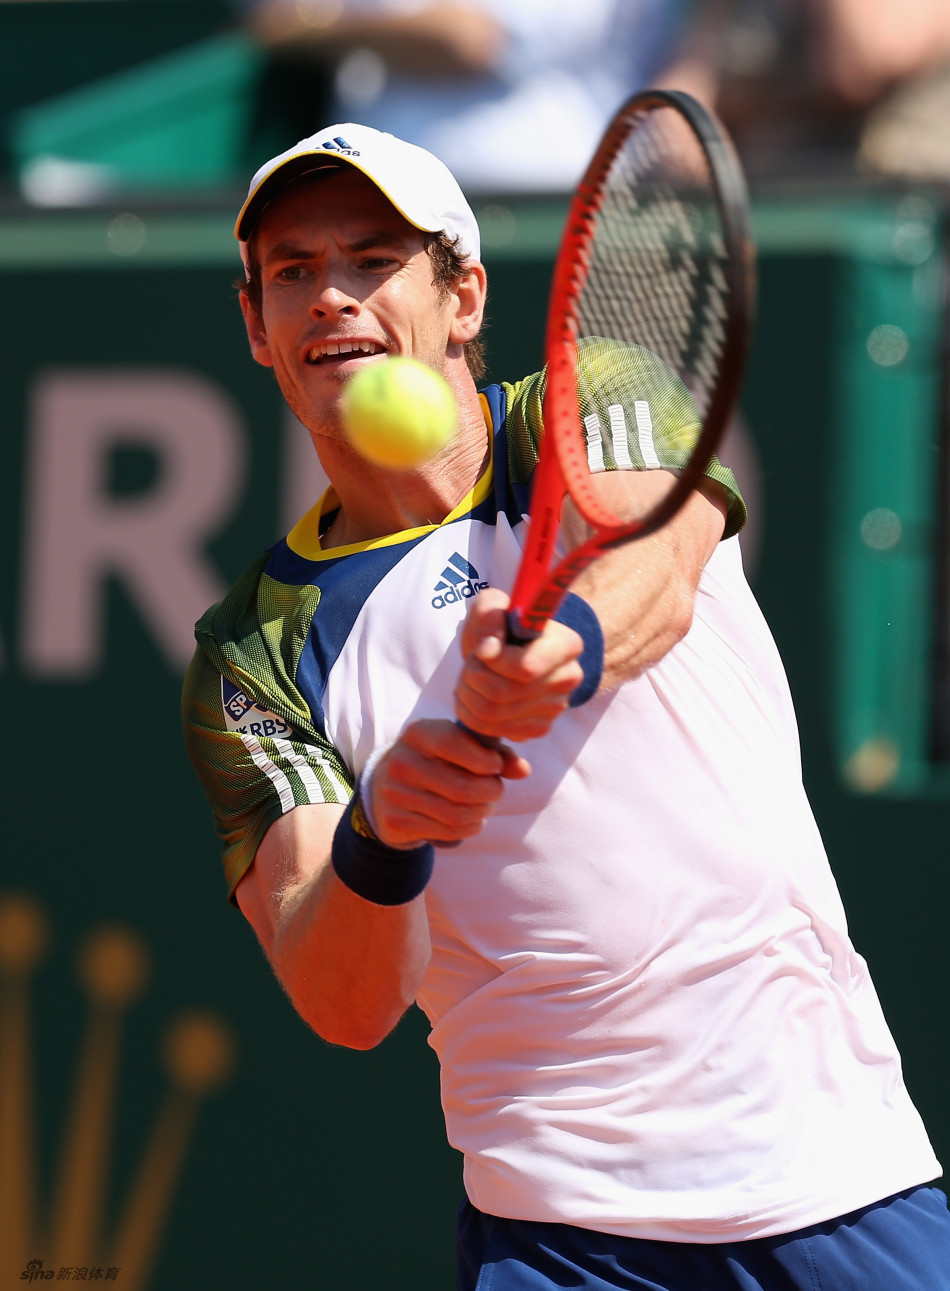  Andy Murray returns a ball to Stanislas Wawrinka in the third round of Monte Carlo Masters.